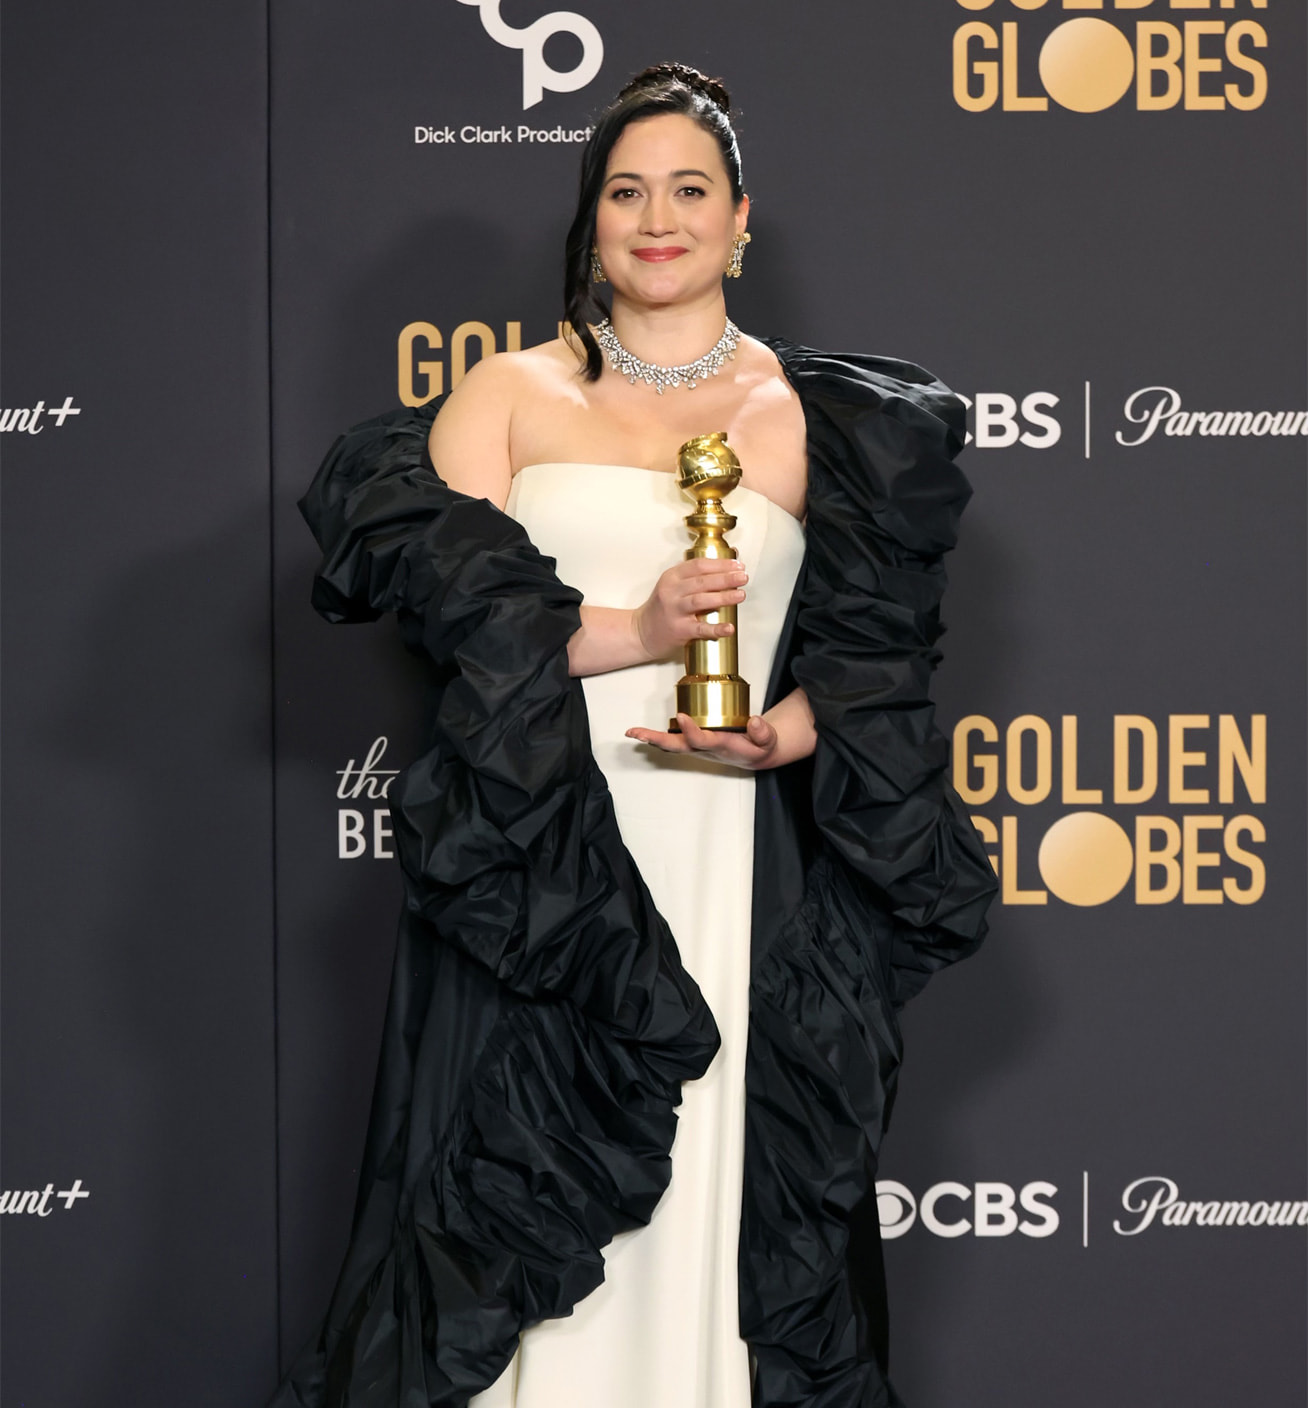 “Killers of the Flower Moon” star Lily Gladstone wins Best Performance at 81st Annual Golden Globes